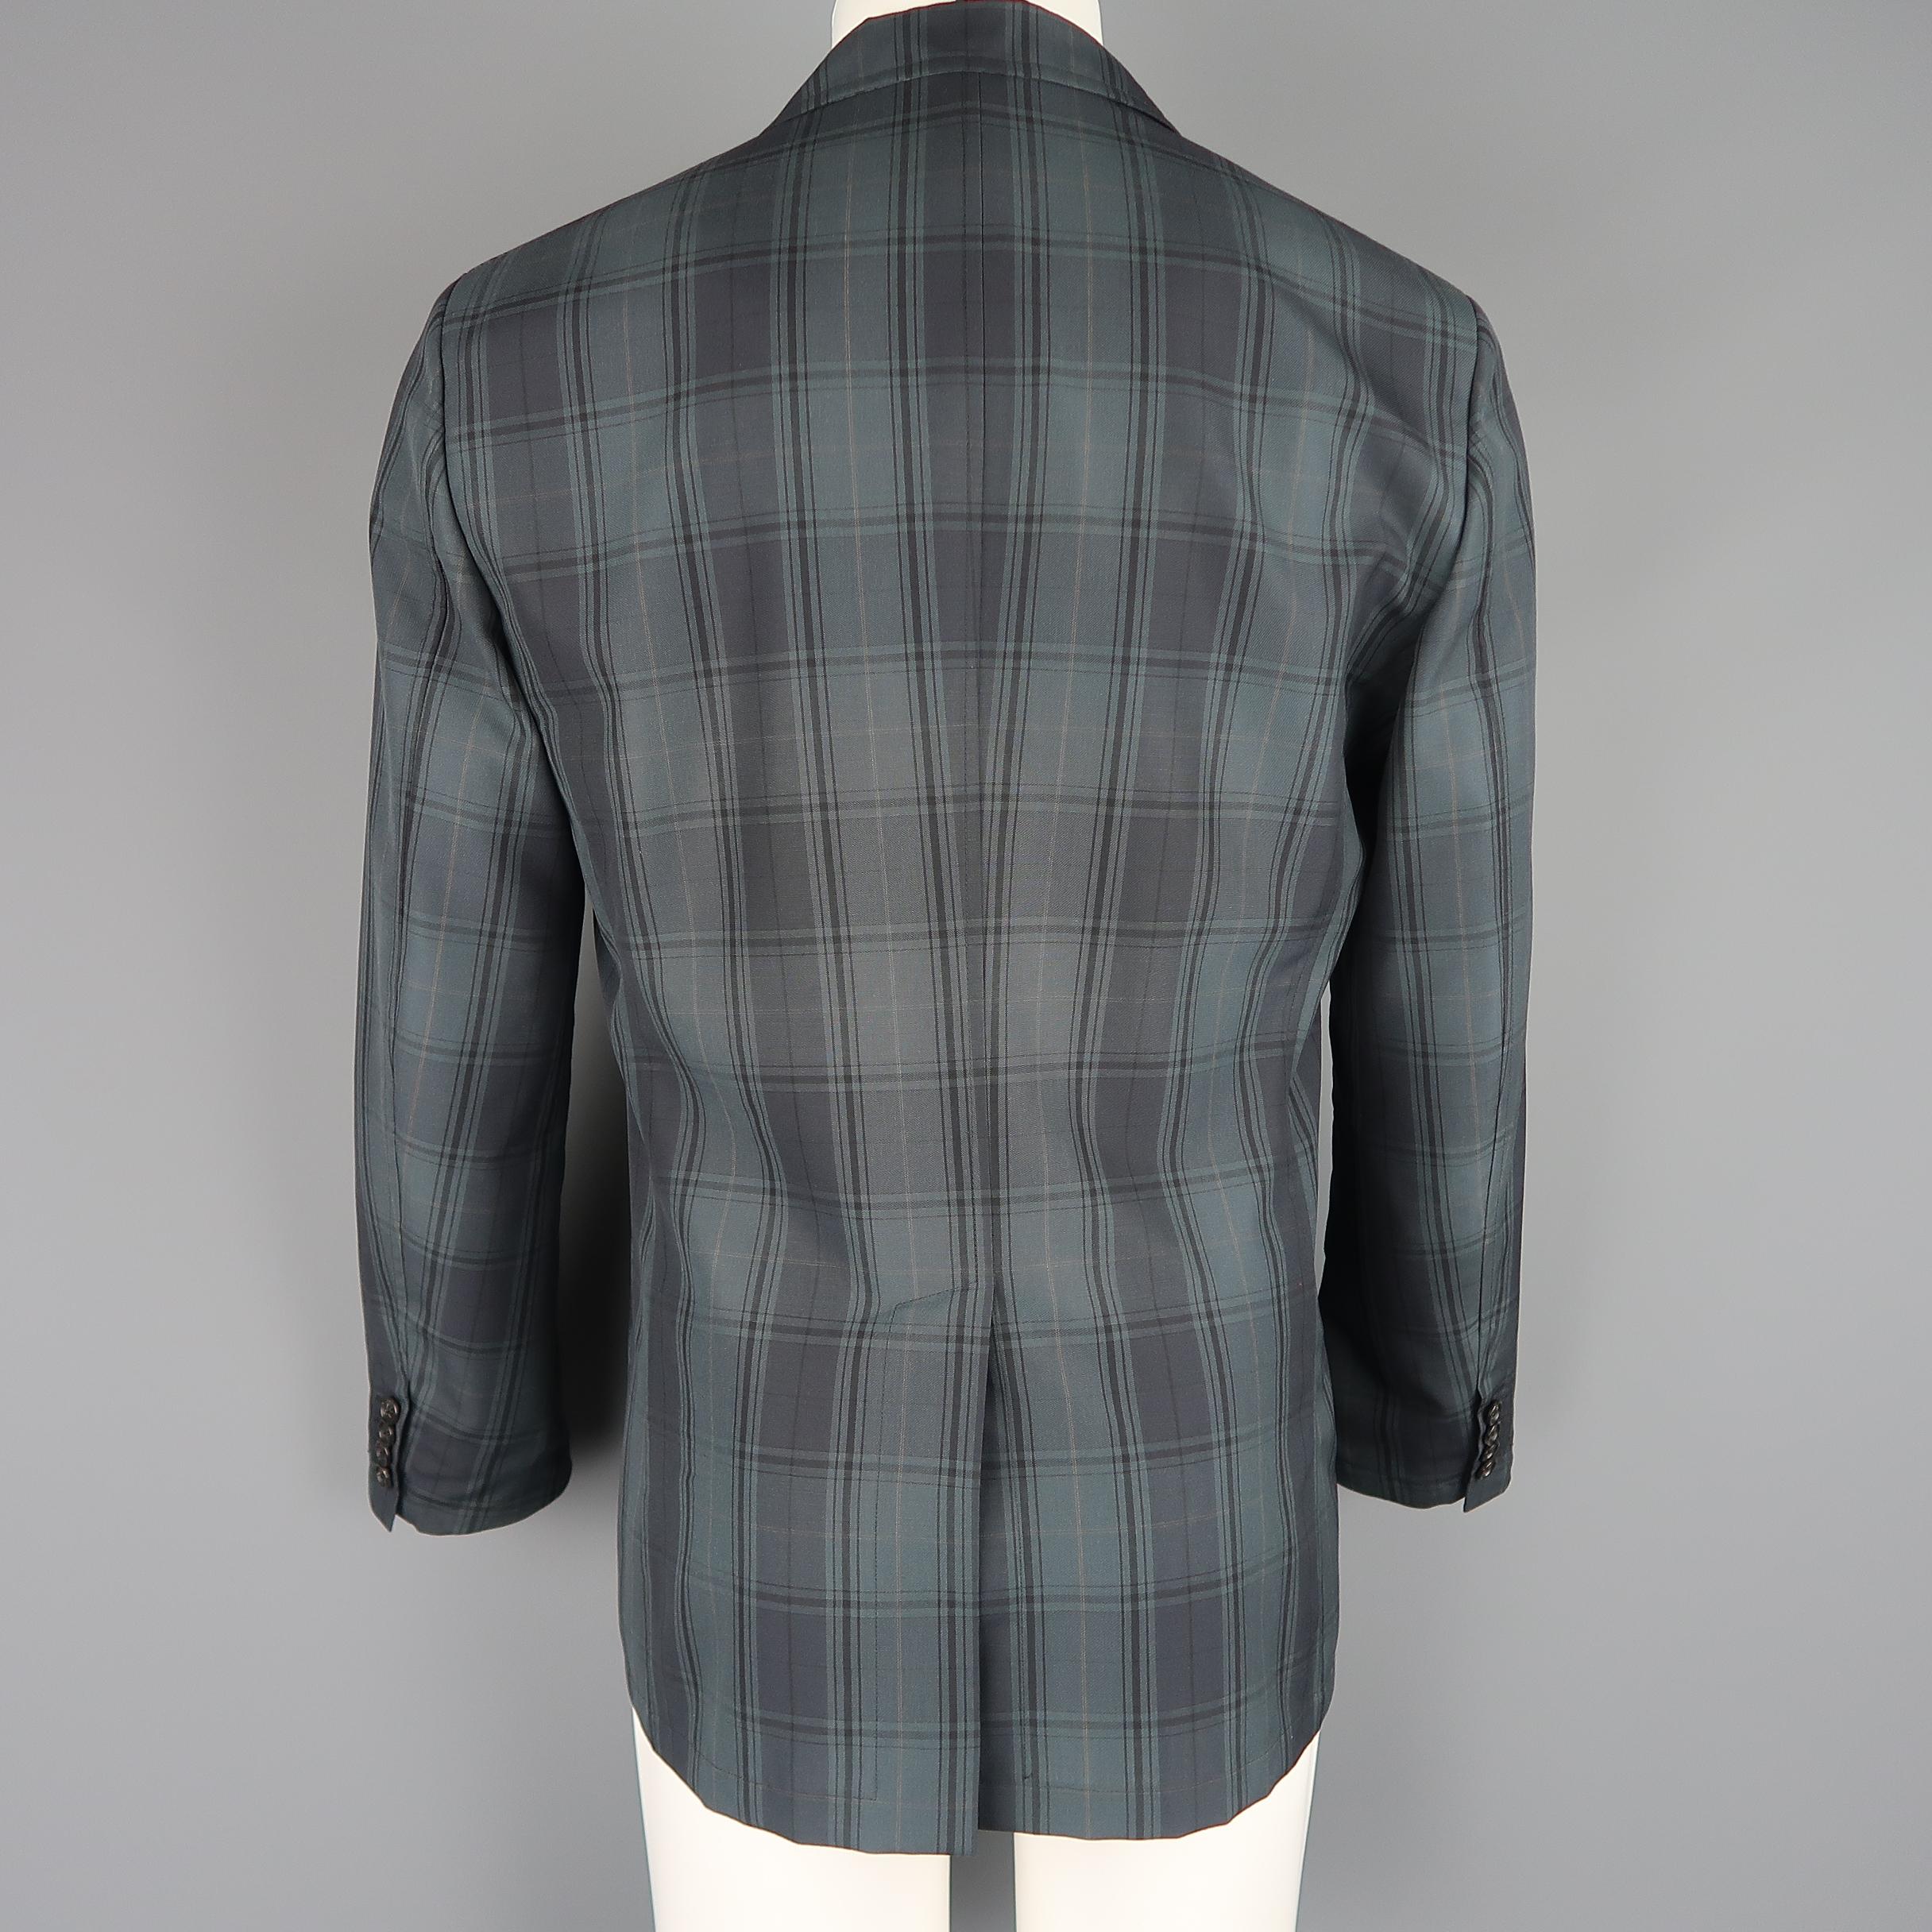 HERMES 42 Regular Gray and Muted Teal Plaid Wool Light Weight Sport ...